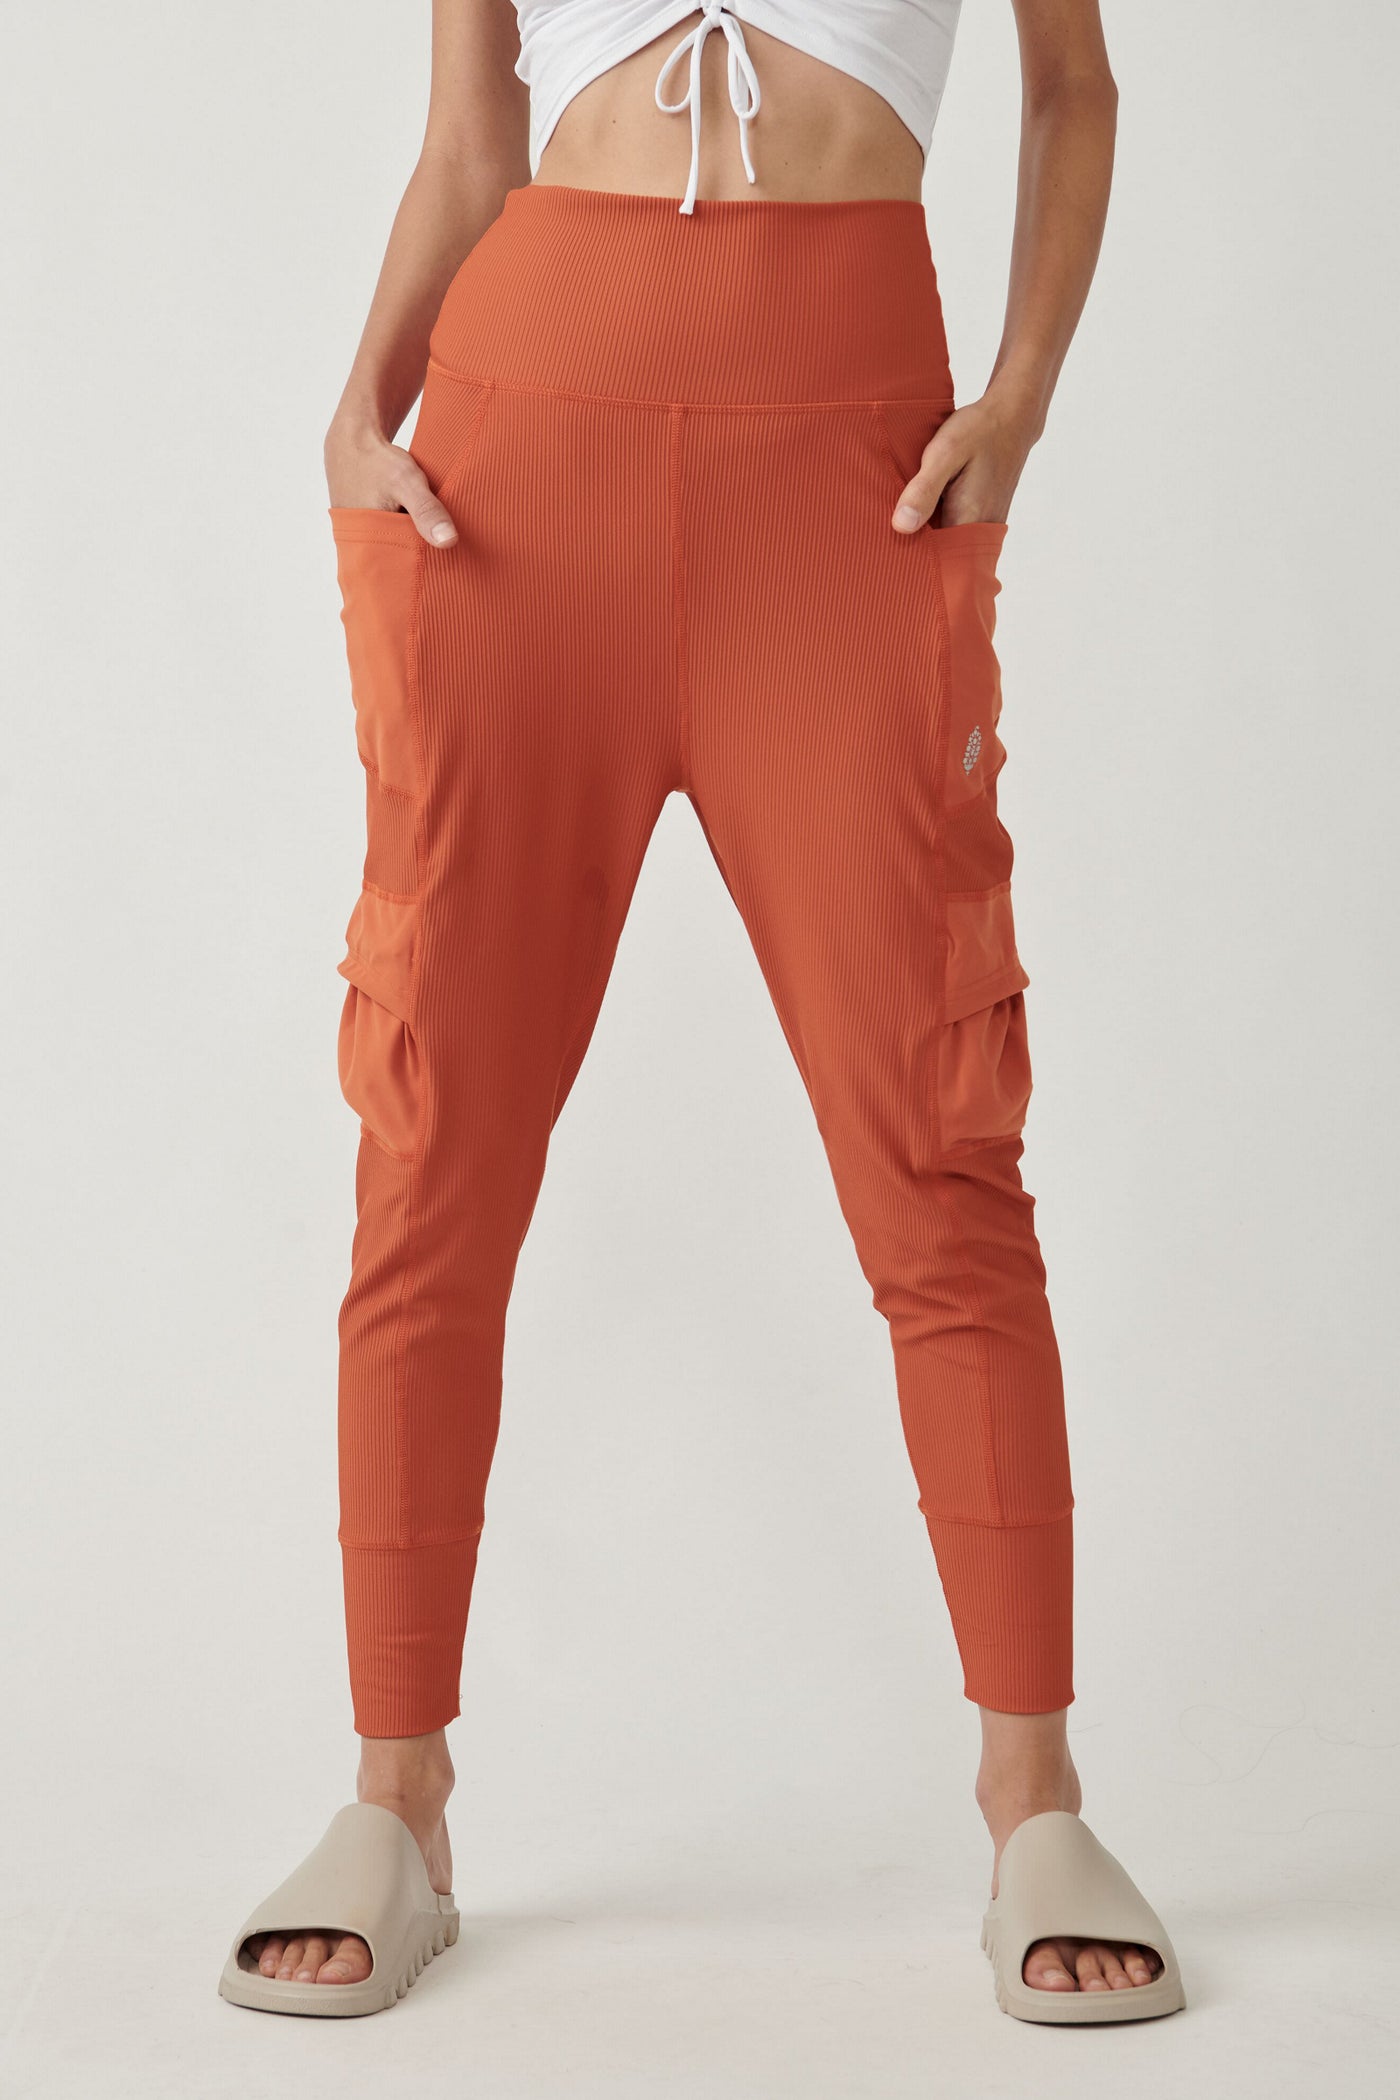 Joggers & Harems for Women, Free People